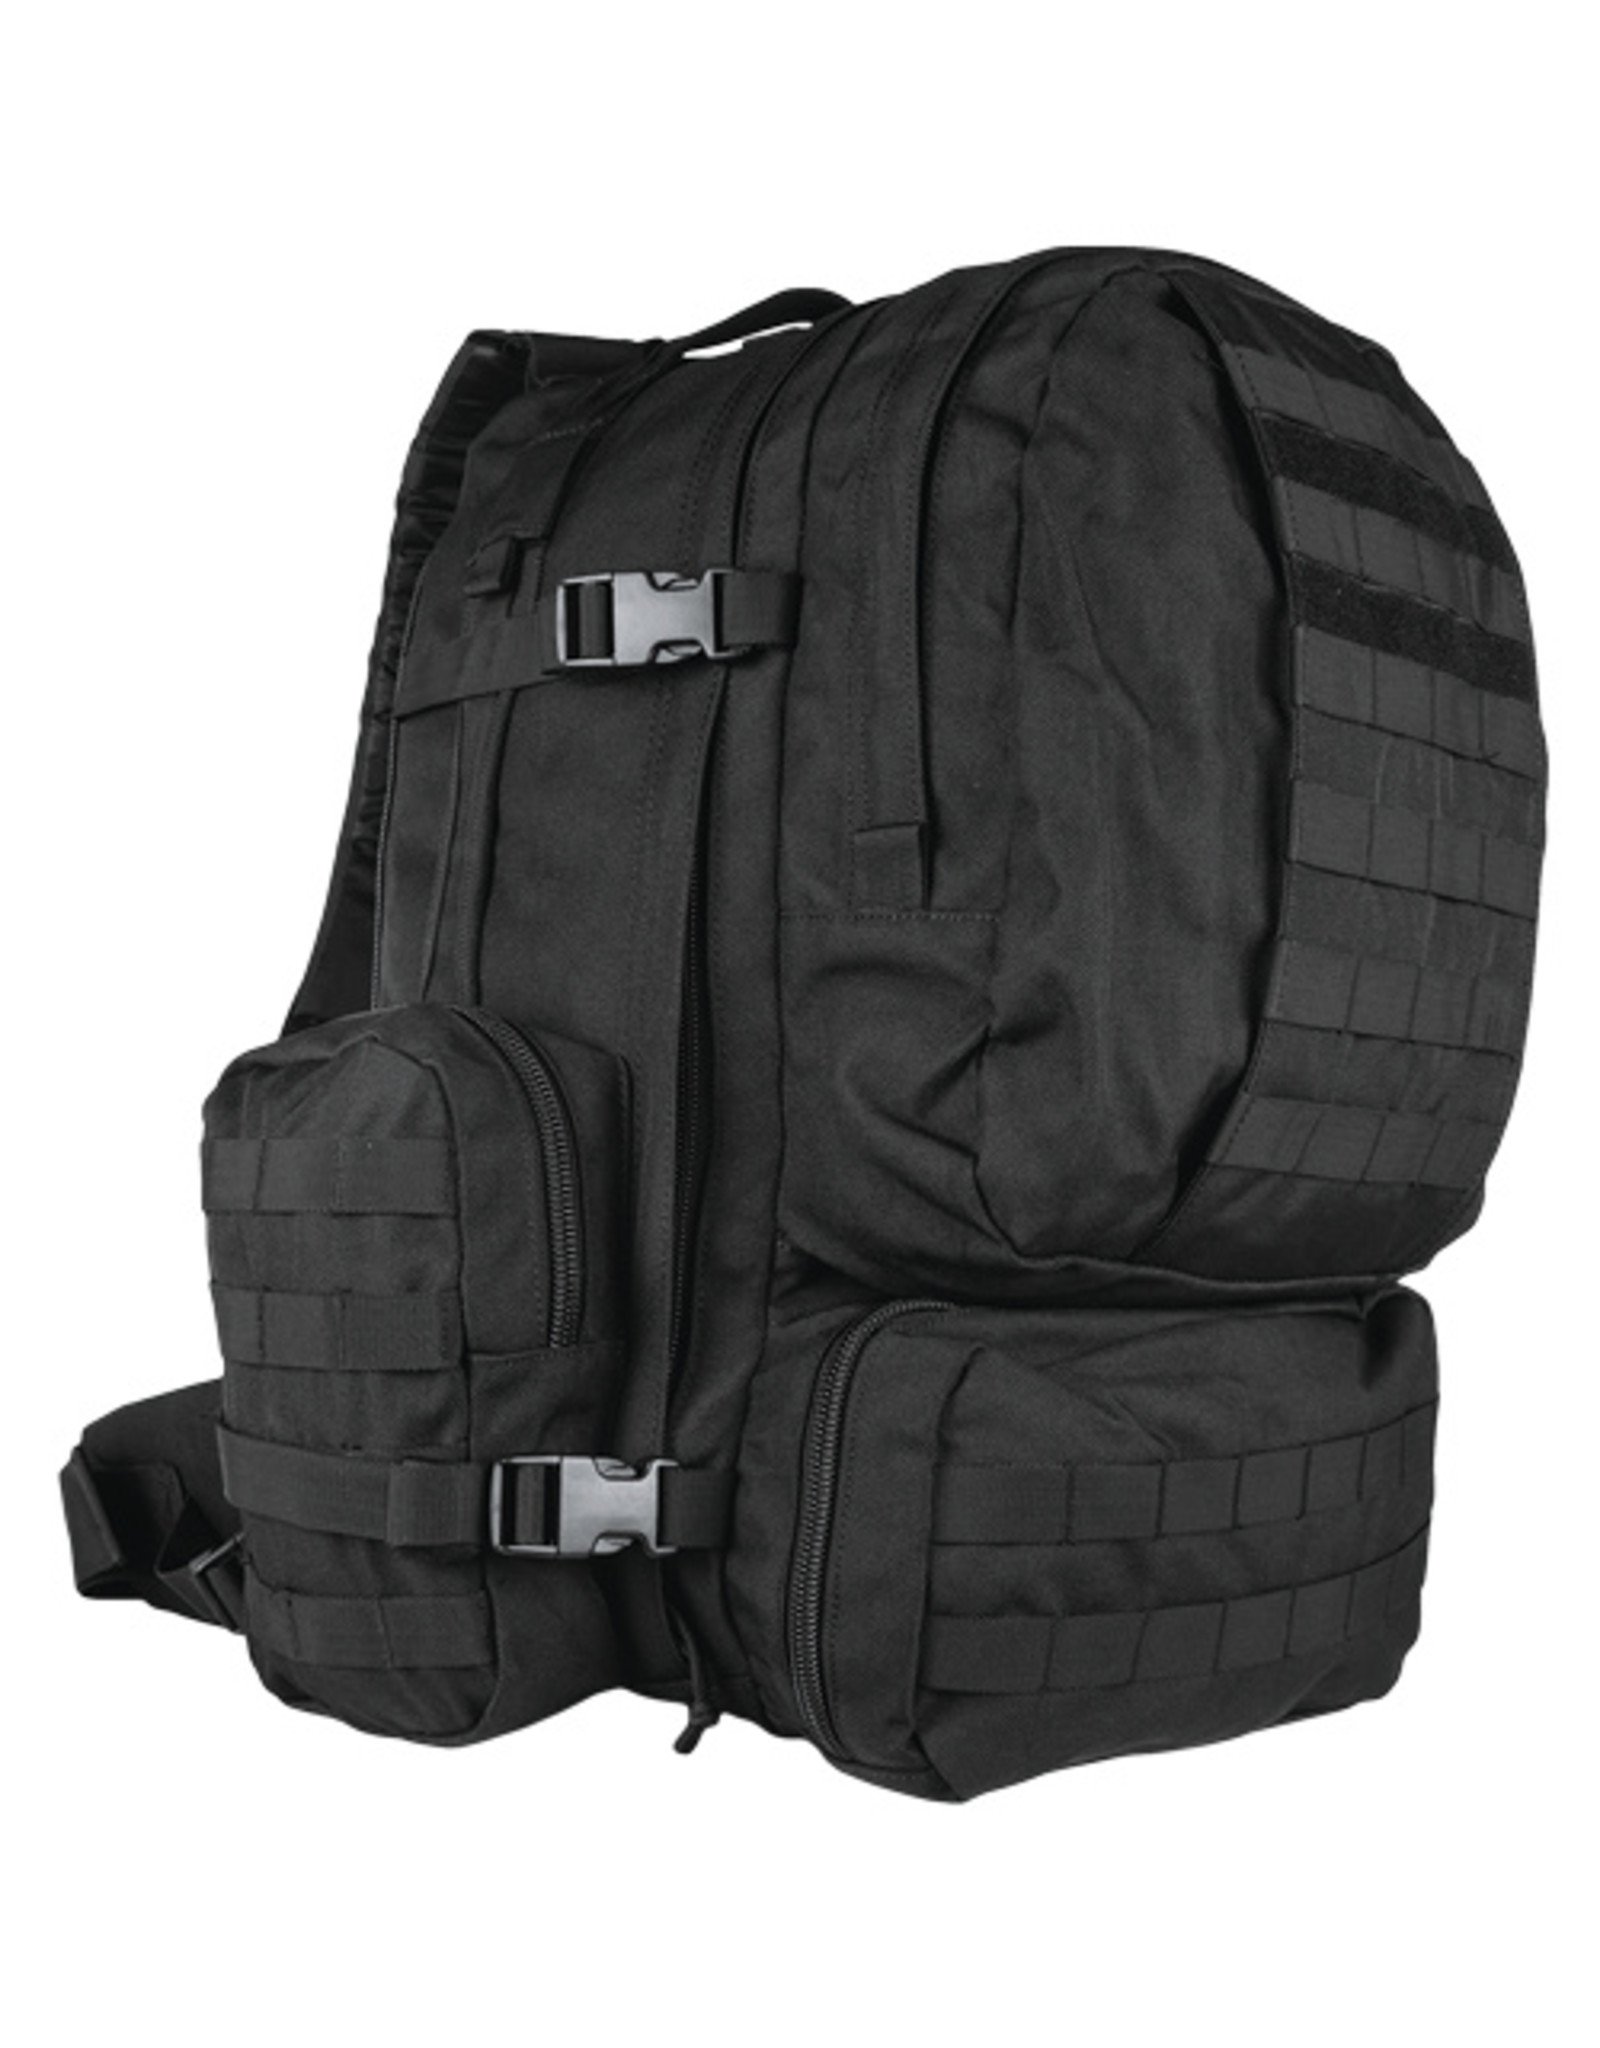 FOX TACTICAL GEAR ADVANCED 3-DAY COMBAT PACK